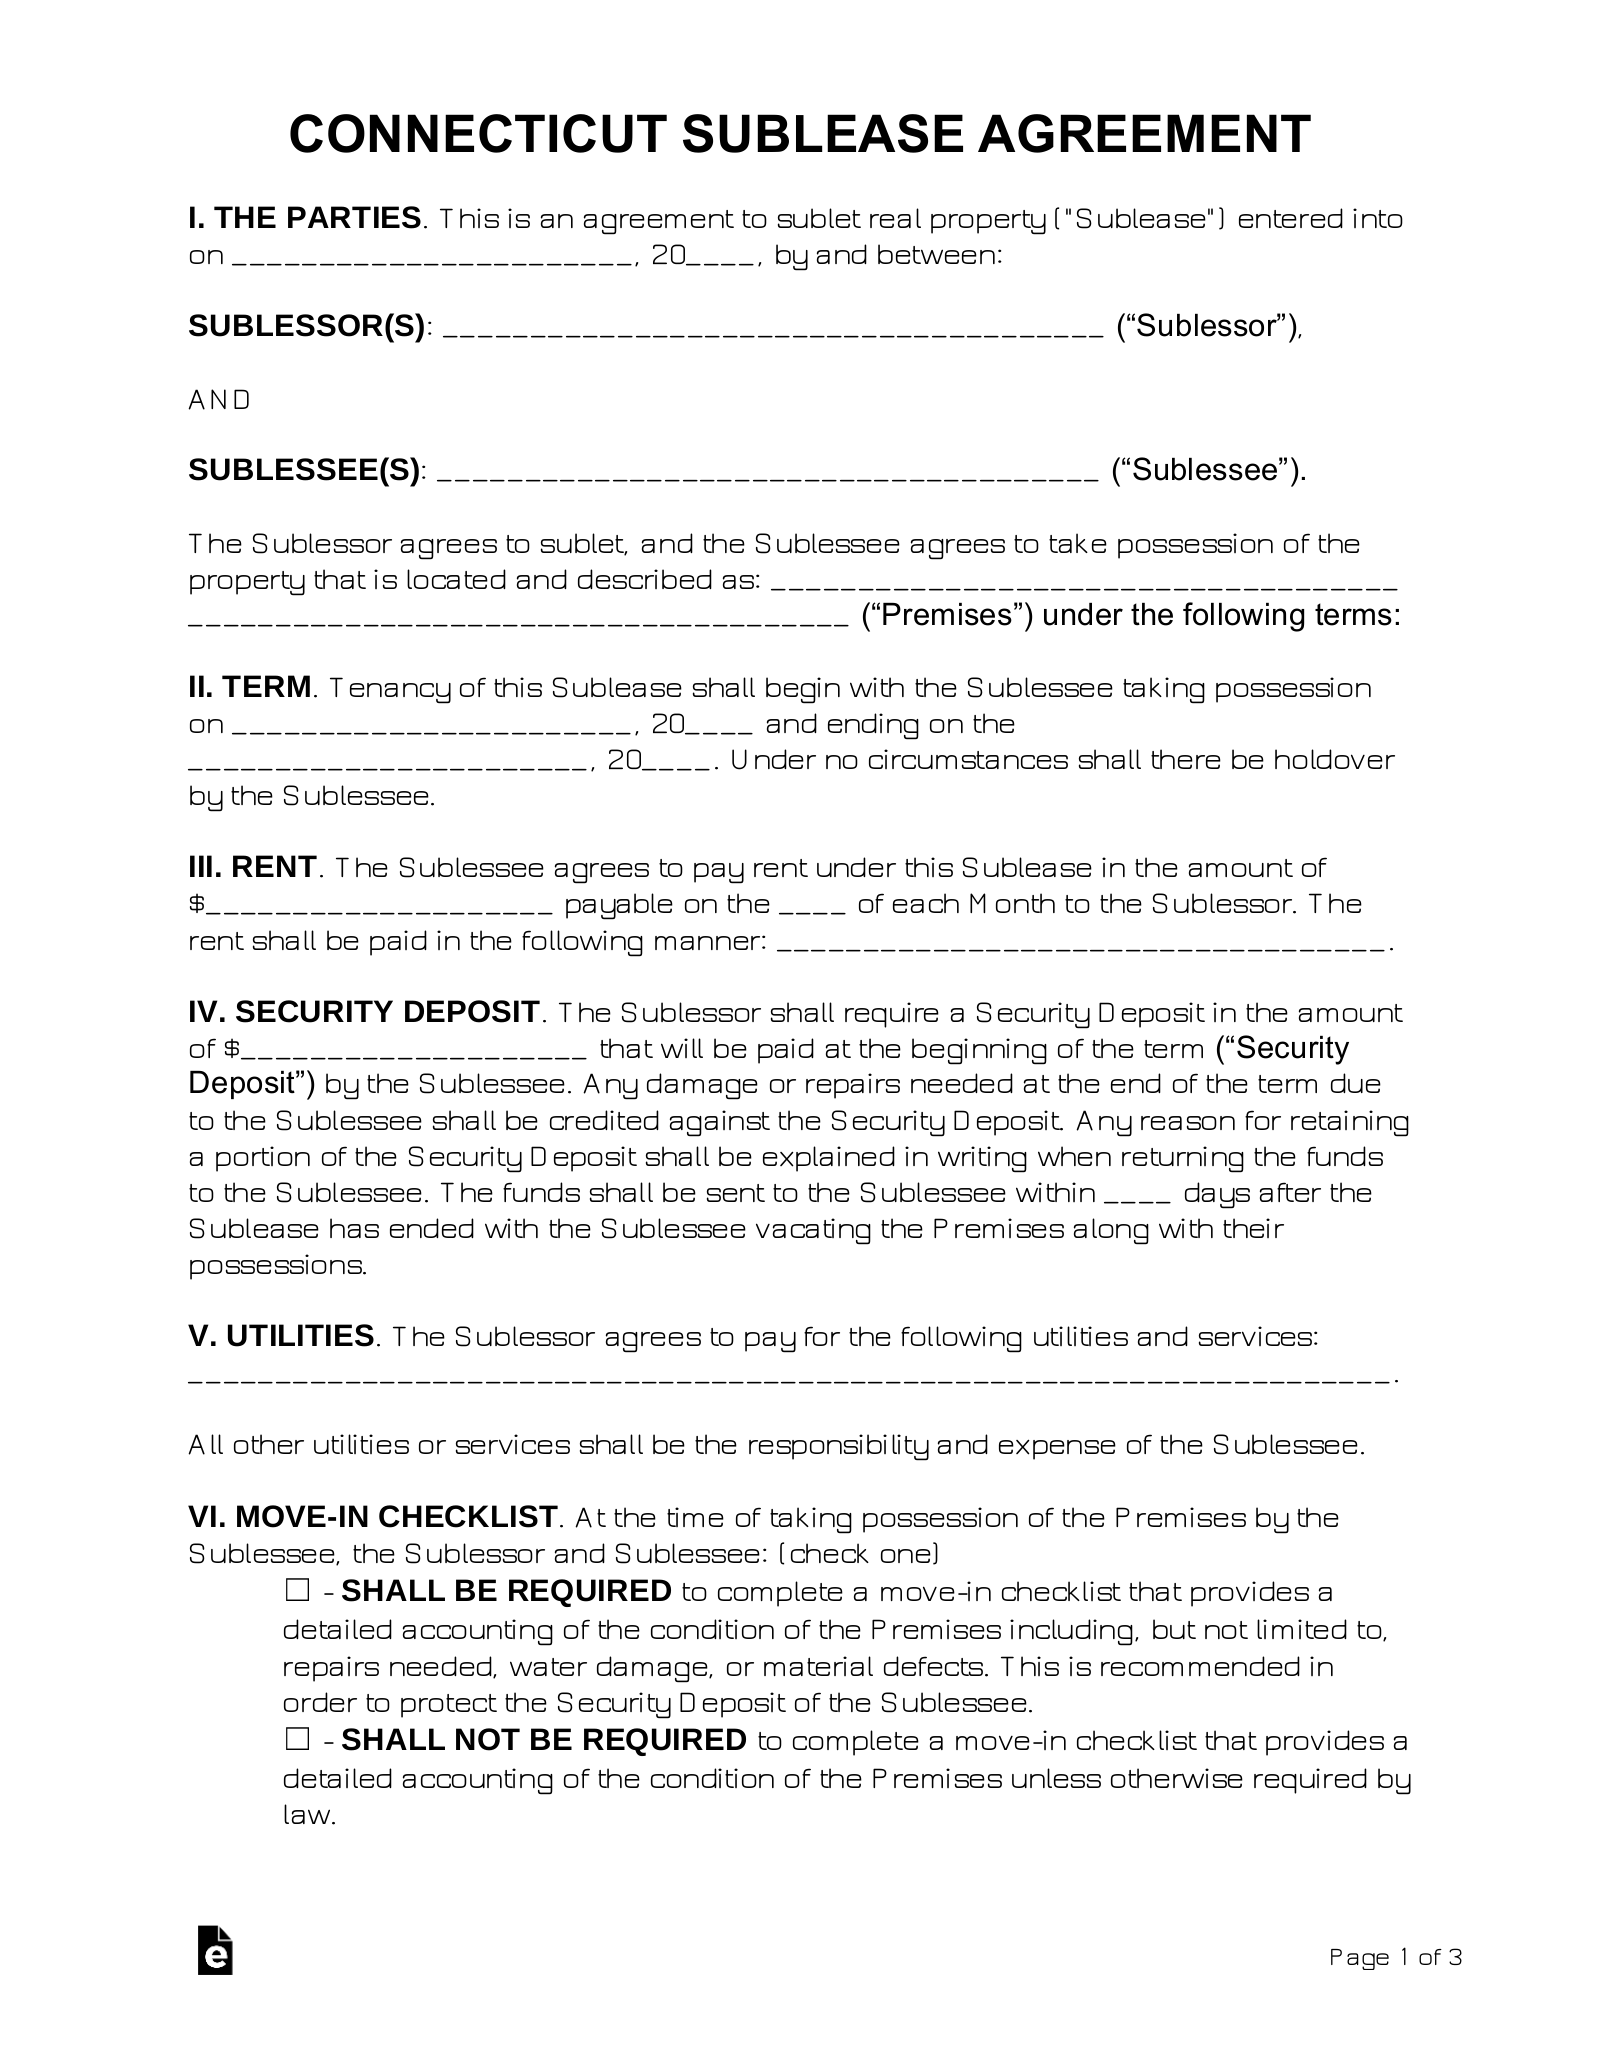 Connecticut Sublease Agreement Template